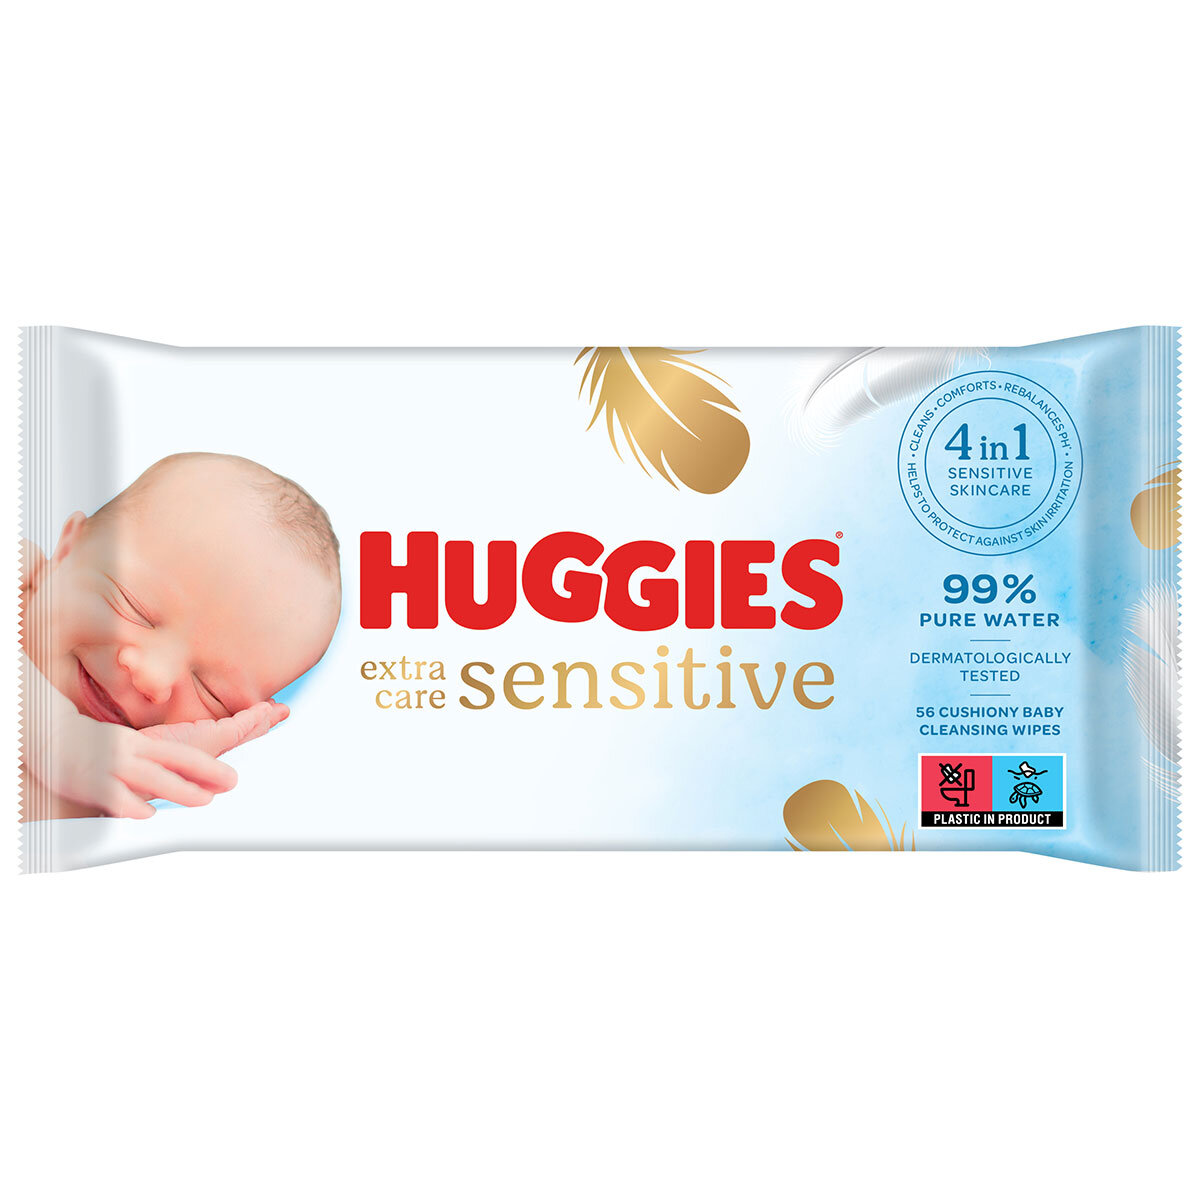 huggies diapers and wipes